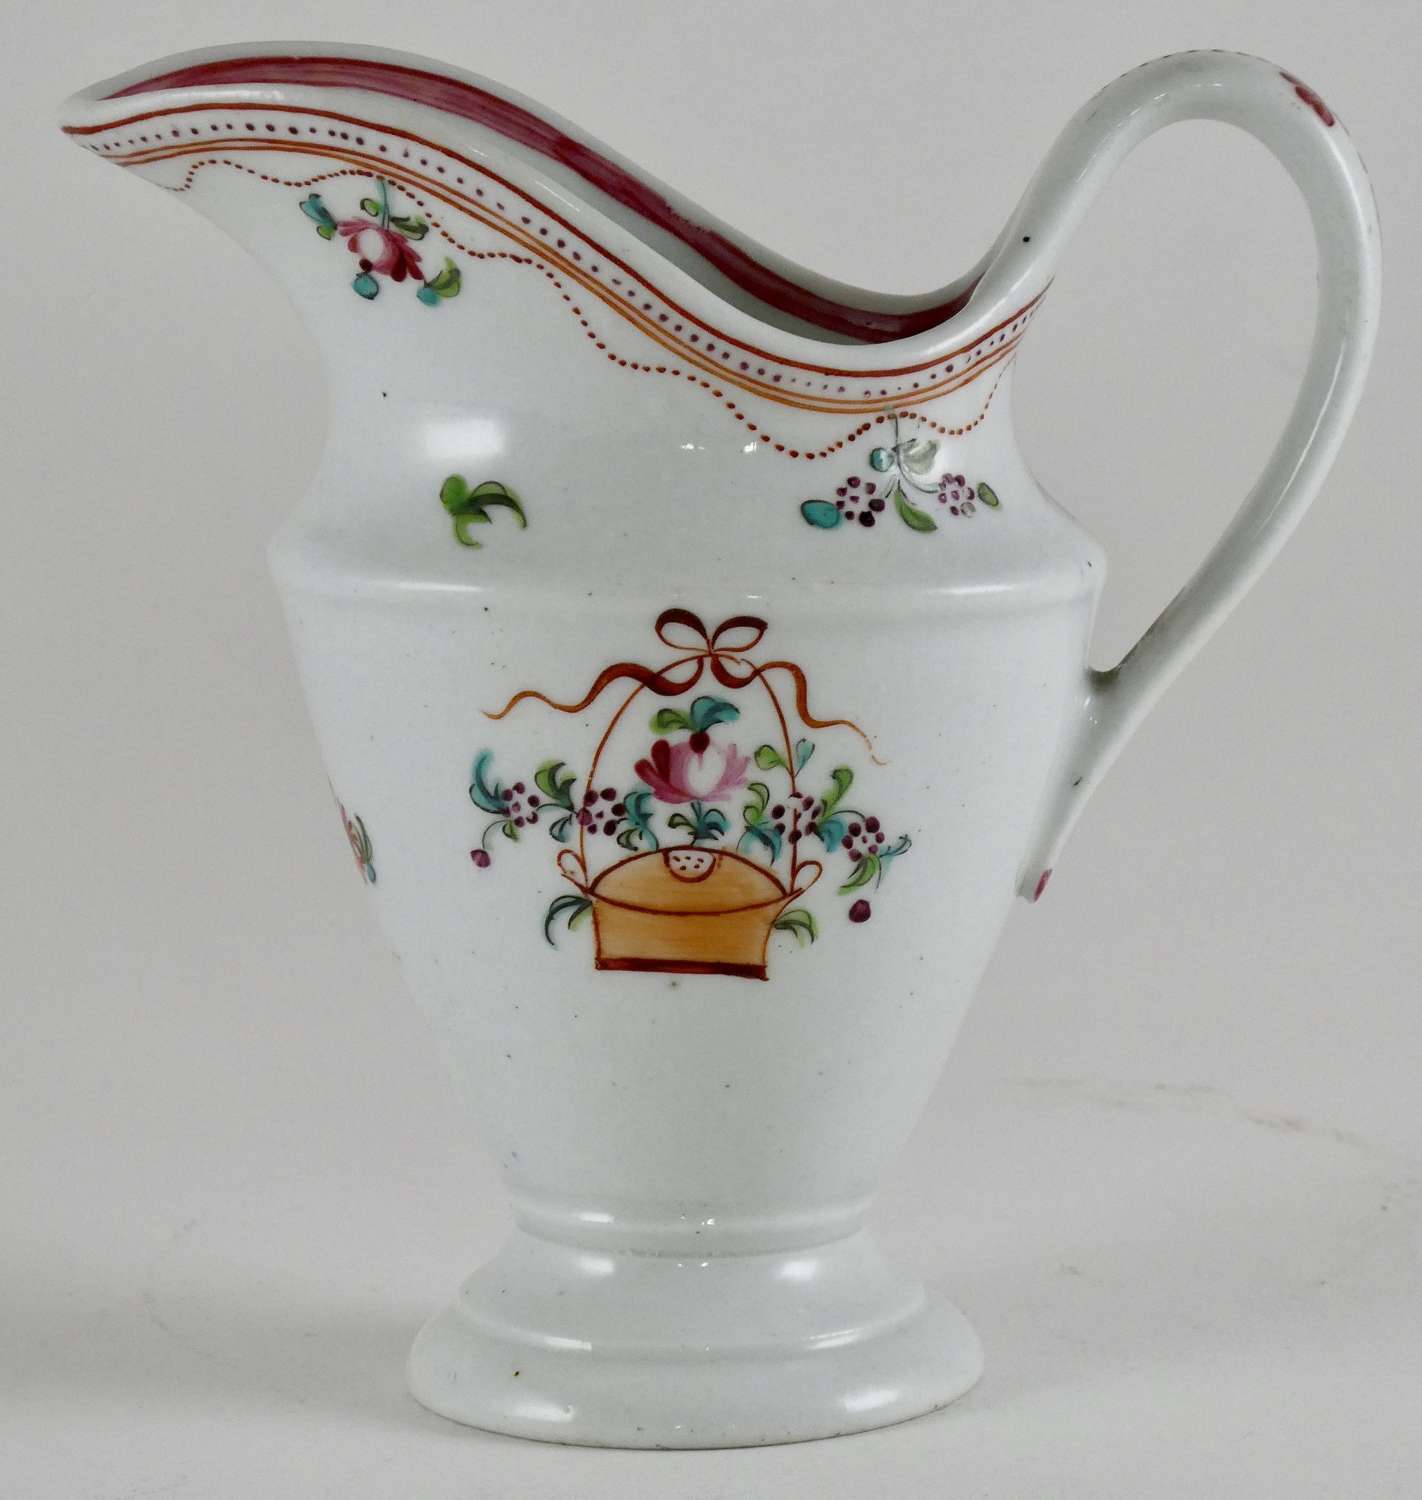 Late 18th Century Newhall Porcelain Jug